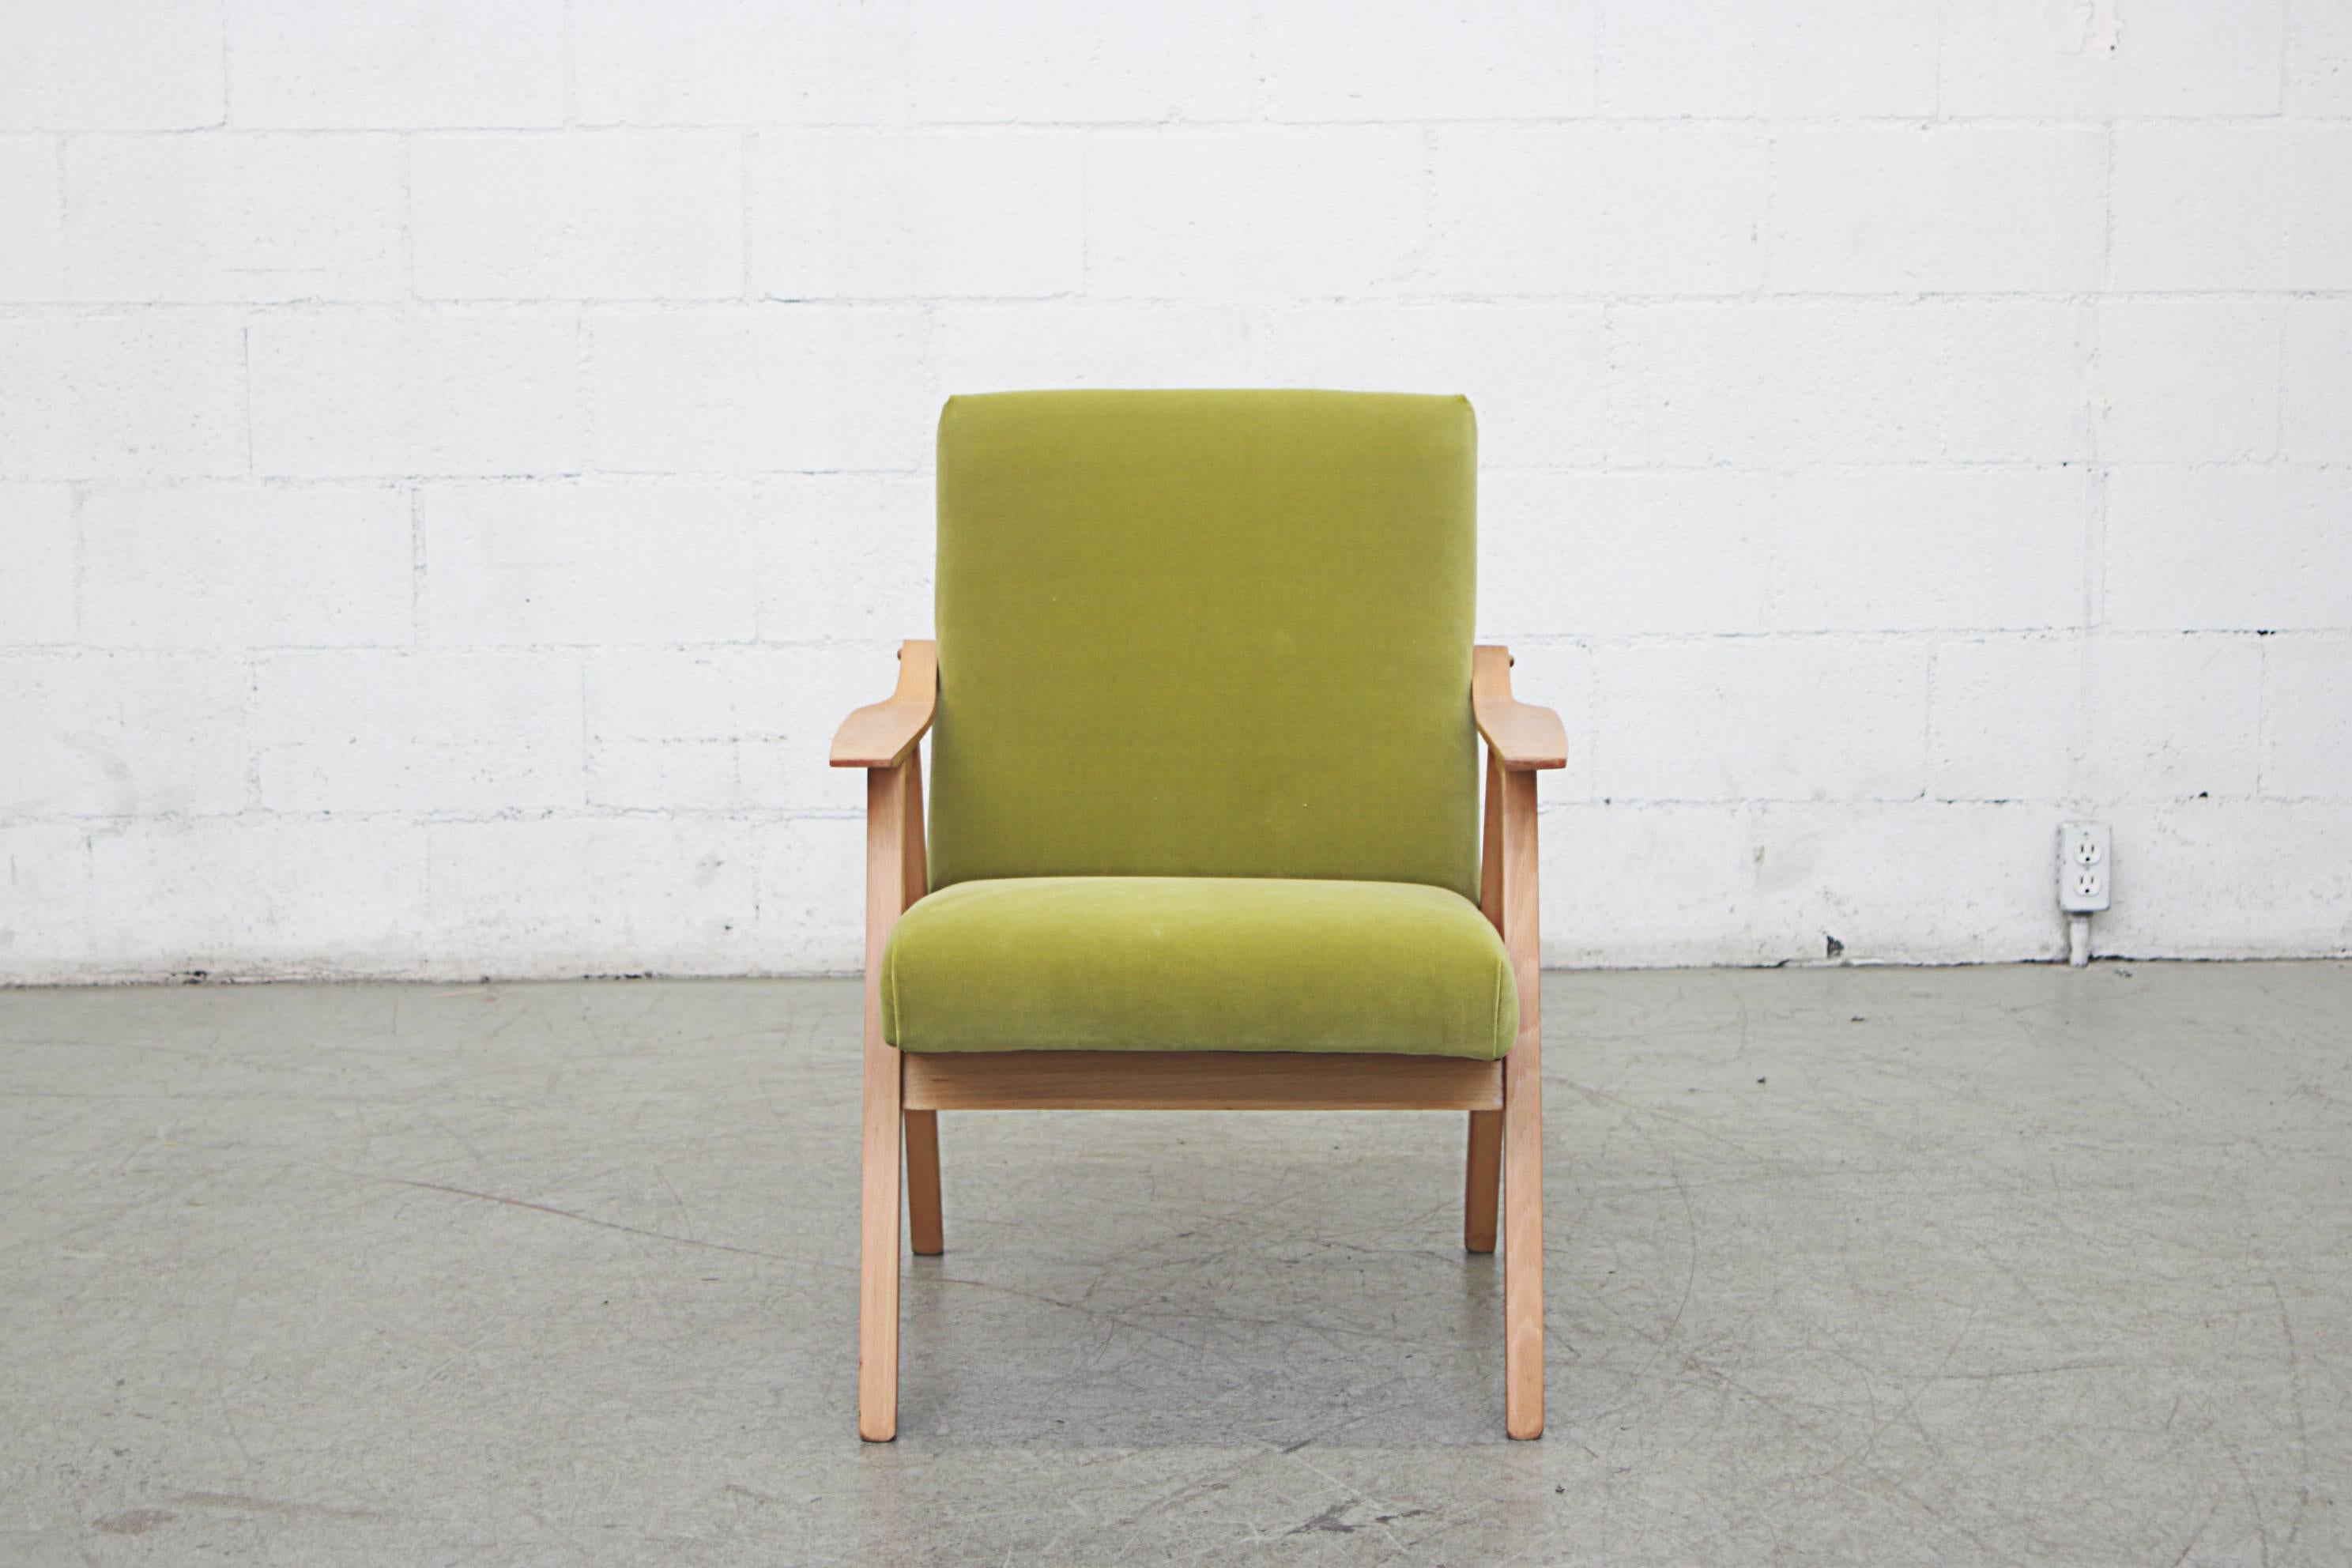 Pair of lightly refinished midcentury lounge chairs with blonde wood frame and arms. Pair of lightly refinished midcentury lounge chairs with blonde wood frame and arms. Newly upholstered in kiwi green velvet. Good original condition, set price.